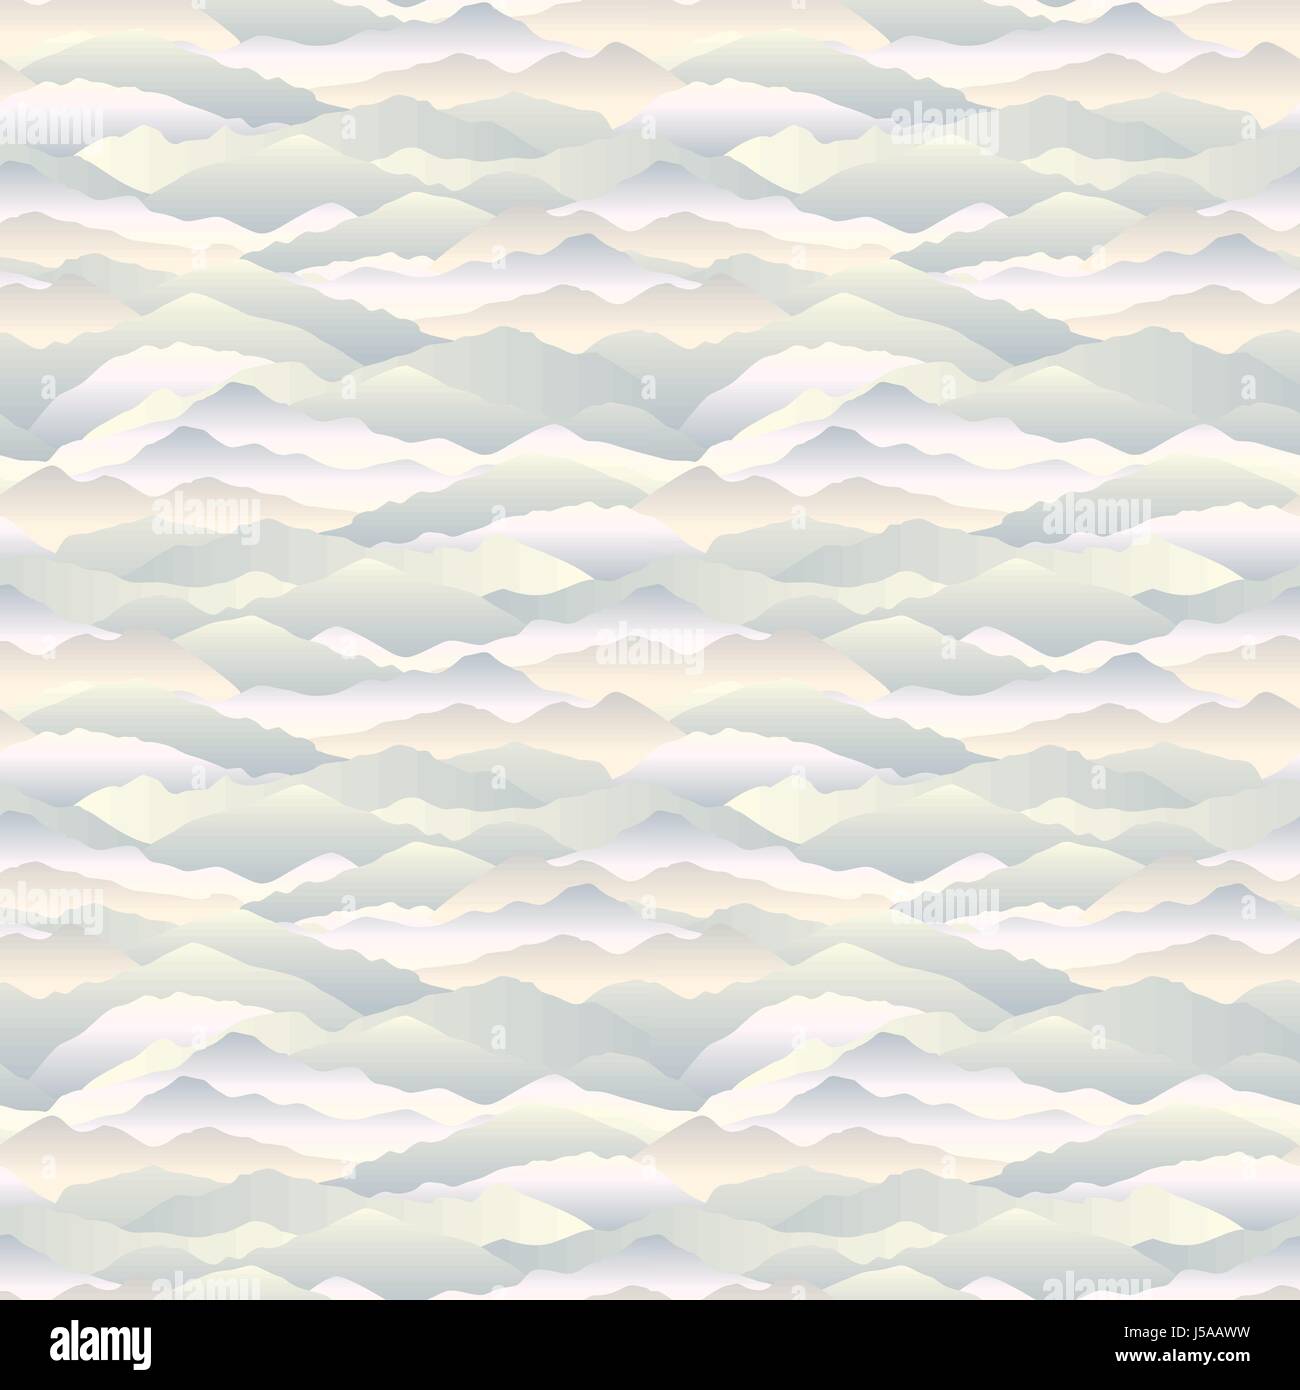 Abstract wave seamless pattern. Mountain skyline background. Landscape tile texture Stock Vector